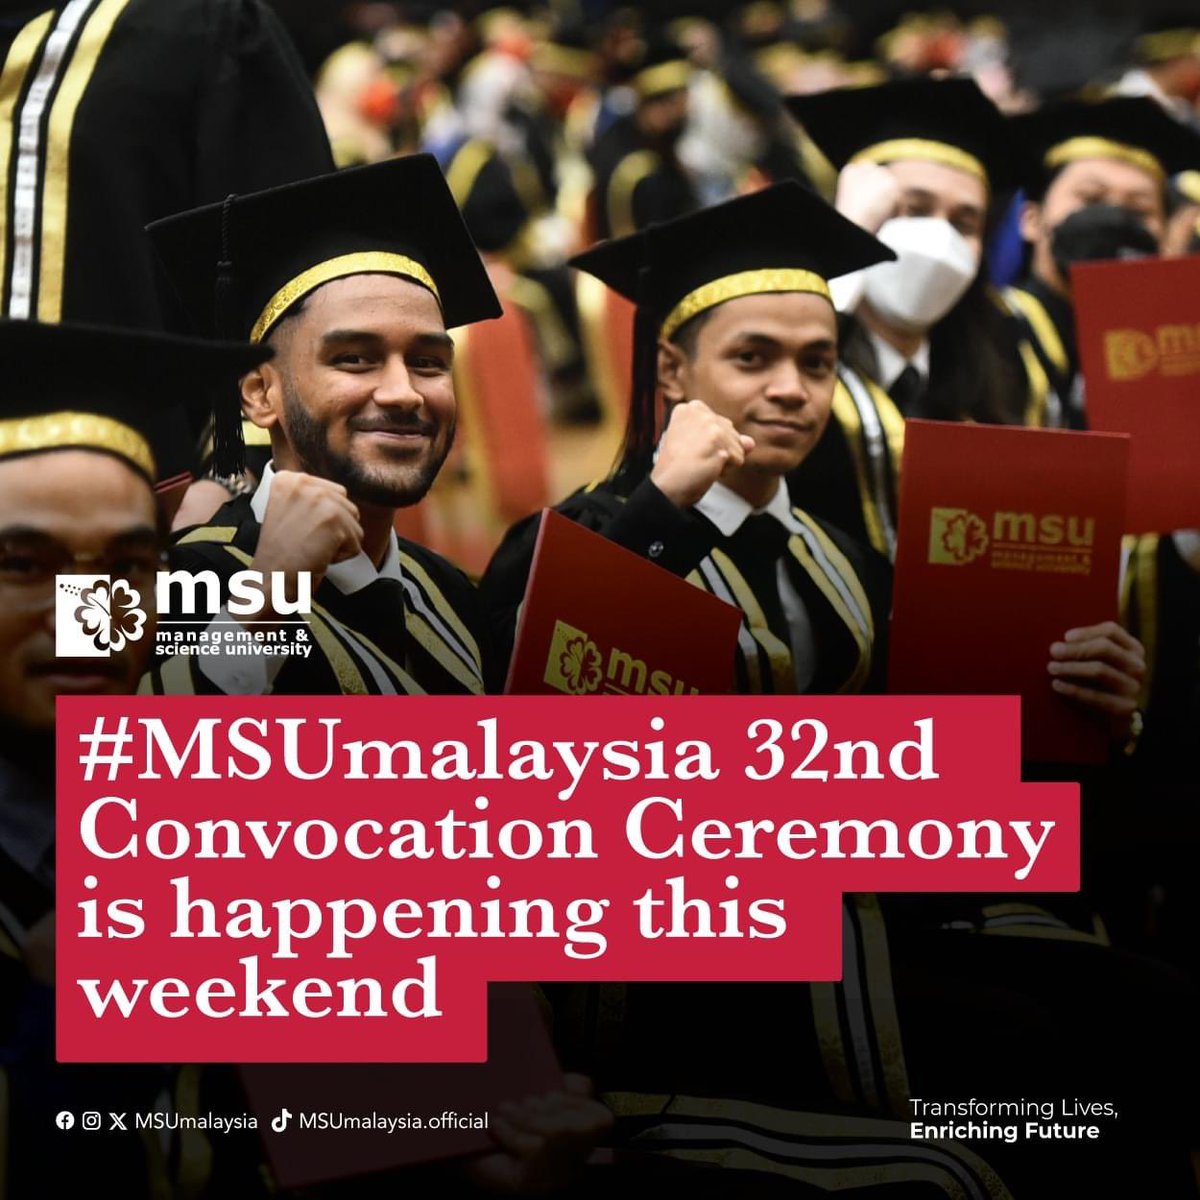 The excitement is real as we approach the #MSUmalaysia 32nd Convocation Ceremony! Mark your calendar and be sure to come fully prepared for the event that celebrates your hard work and success. 

 #MSUconvo32

#repost @MSUmalaysia